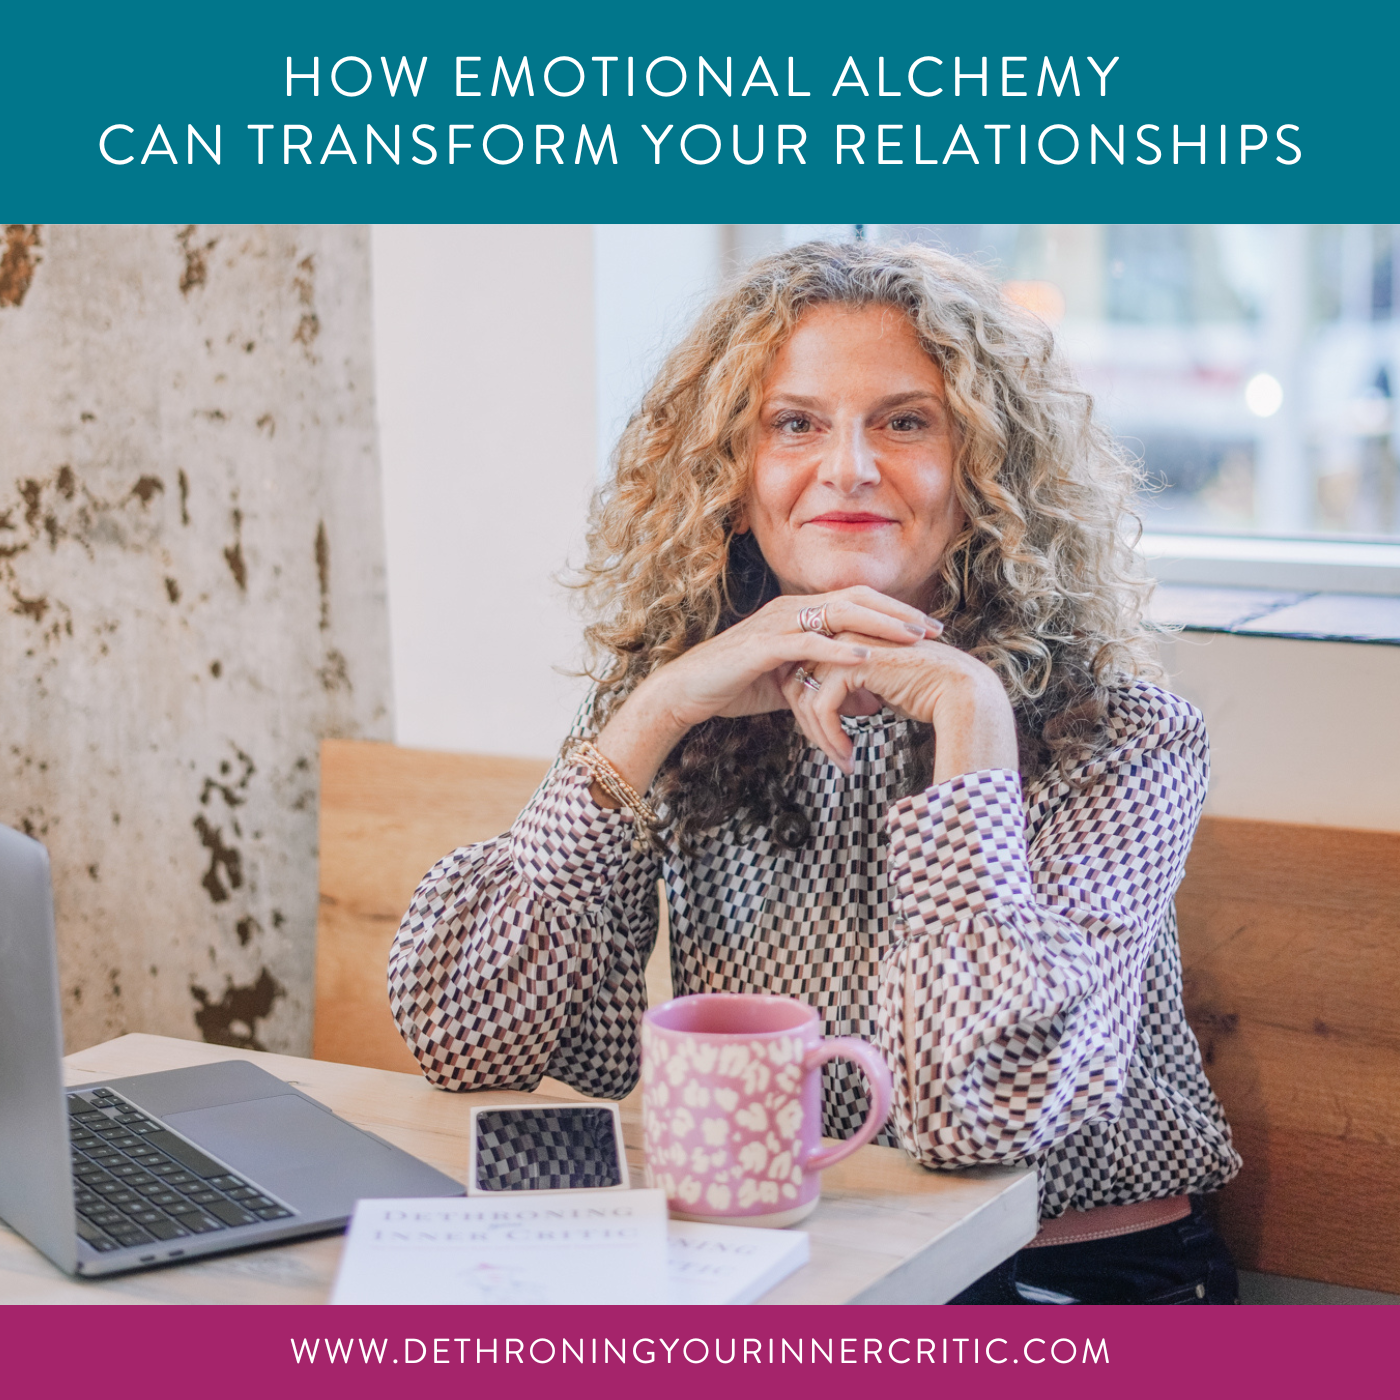 How Emotional Alchemy Can Transform Your Relationships